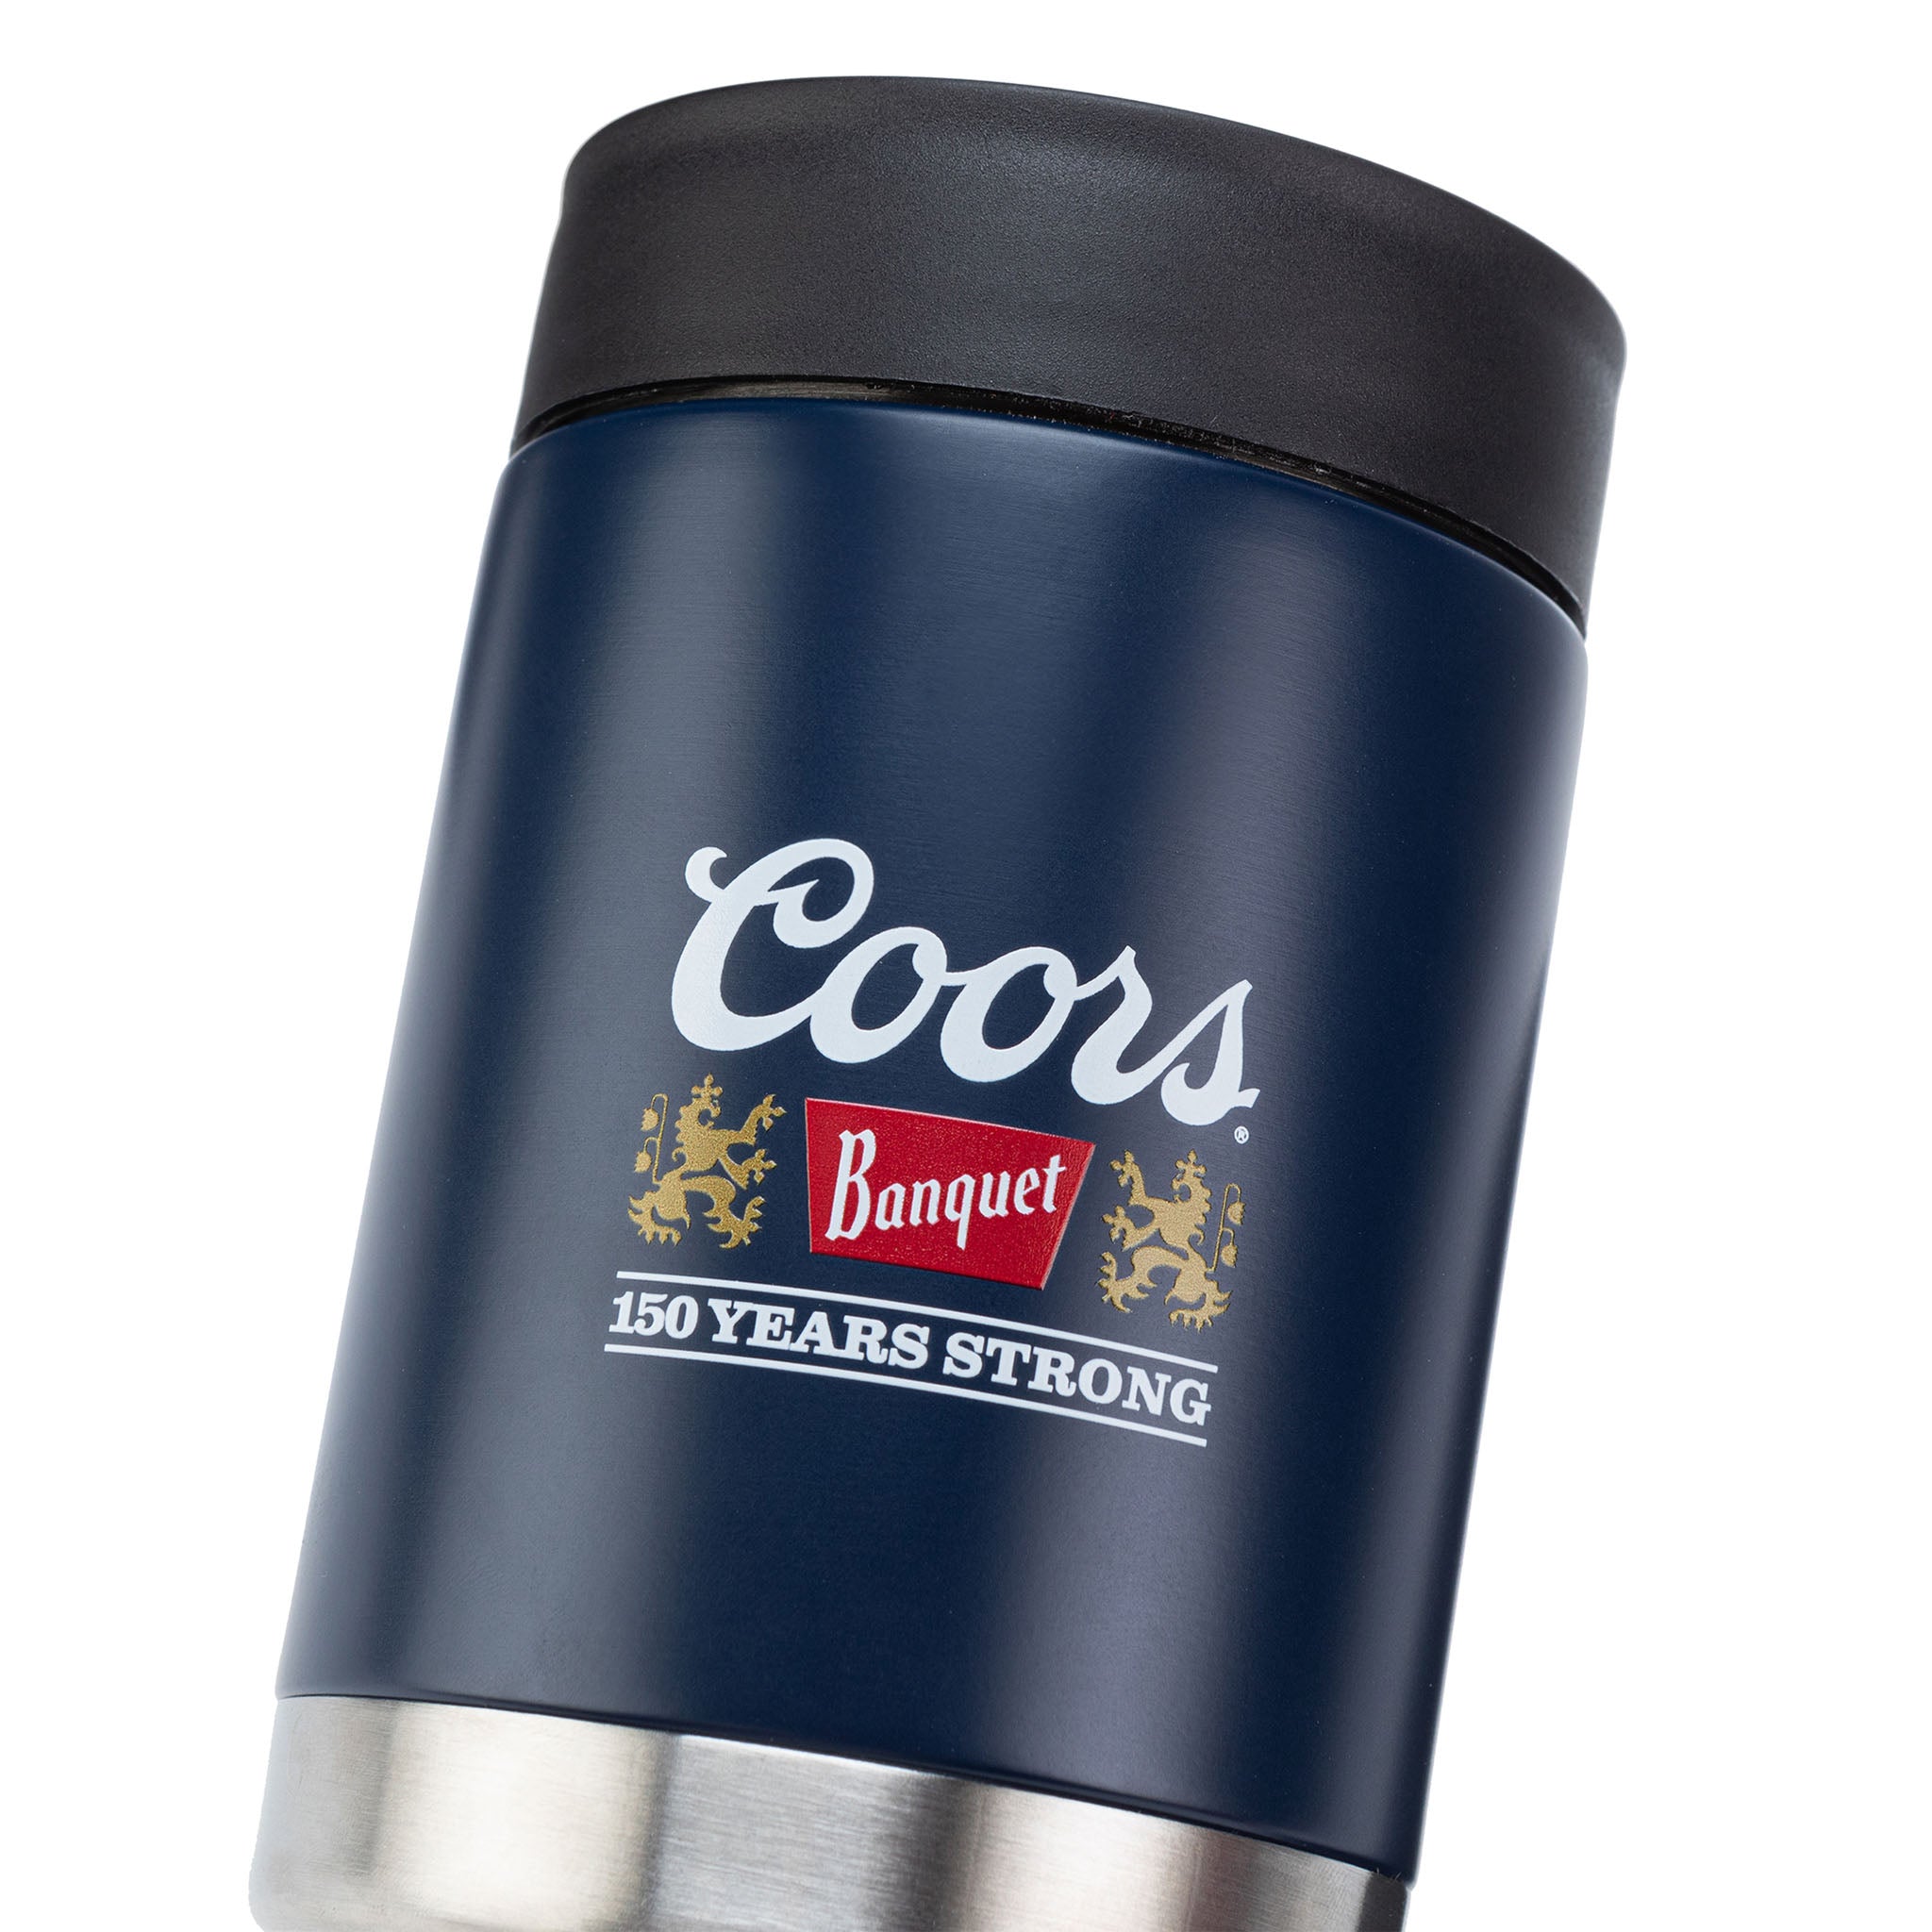 SEAGER X COORS BANQUET CAN ARMOR (150 YEARS)